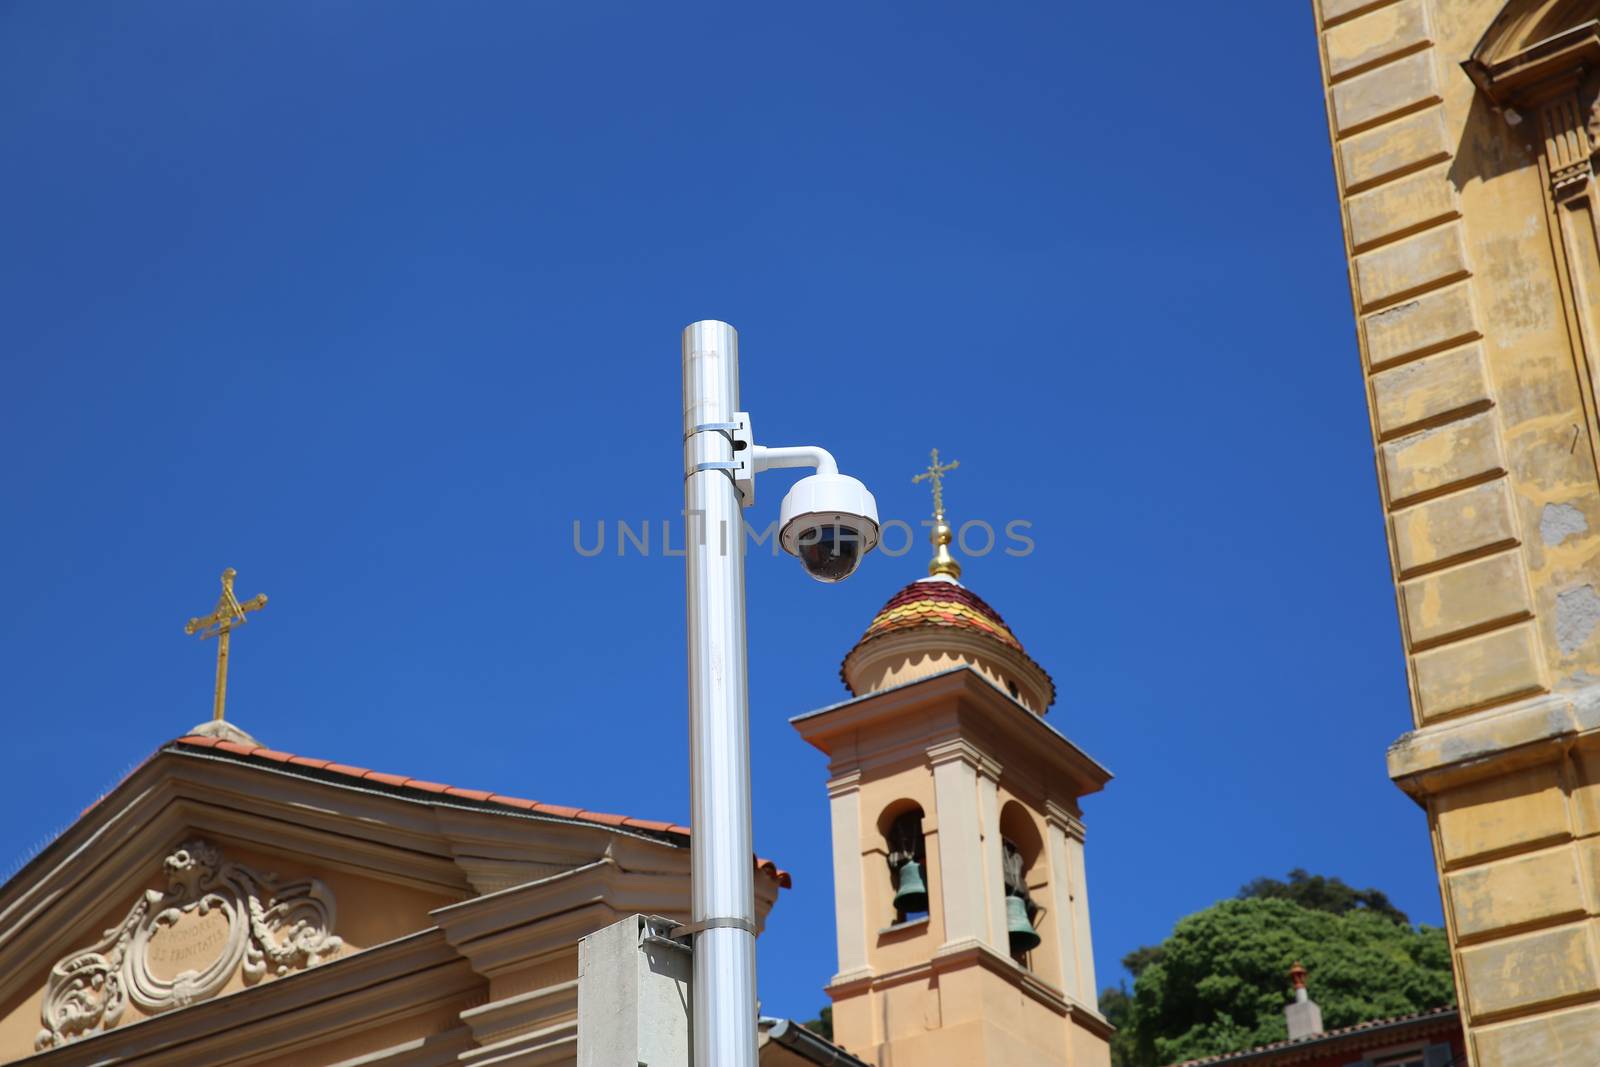 Dome Type Camera in Nice by bensib